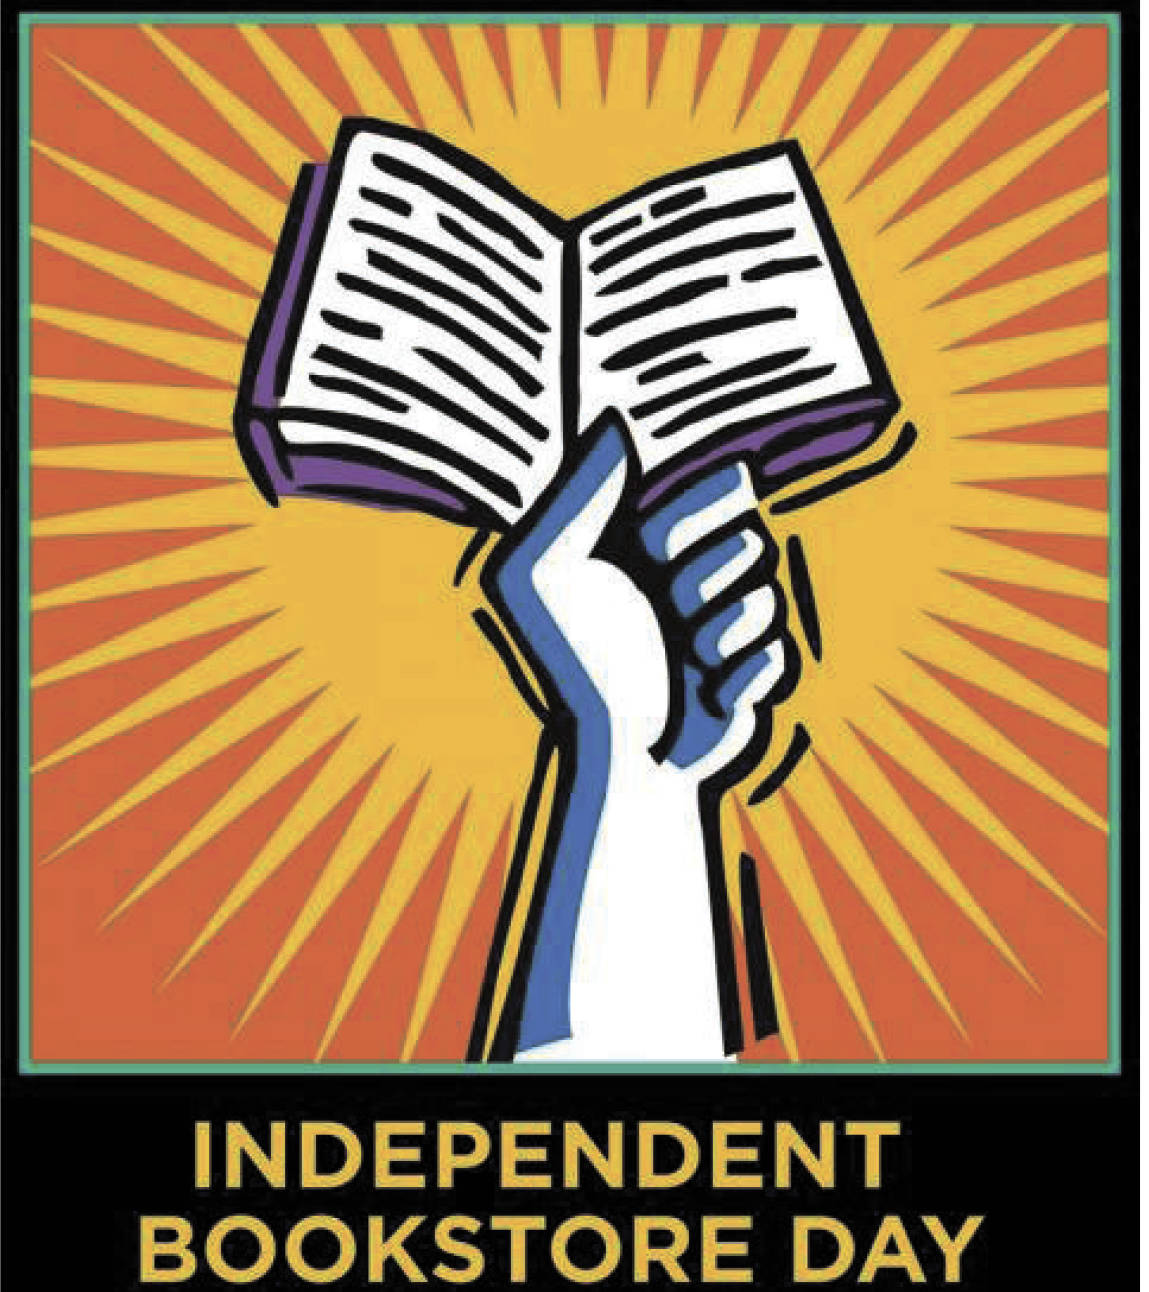 Celebrate Independent Book Store Day with Griffin Bay Bookstore